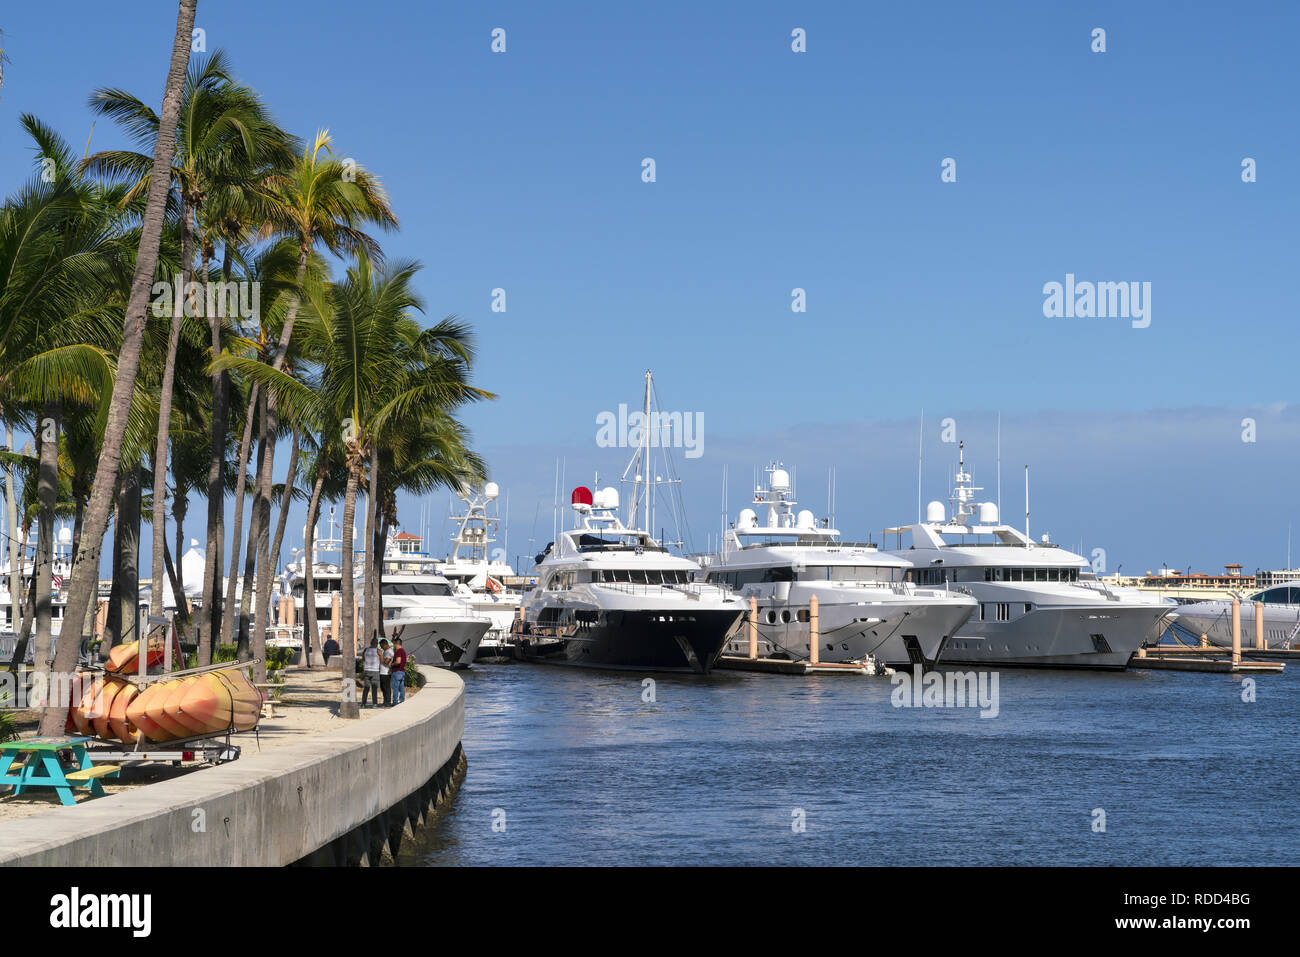 21 December 2018 - Palm Beach, Florida, USA. Luxury modern yachts docked in the marine, surrounded by palm trees. Stock Photo